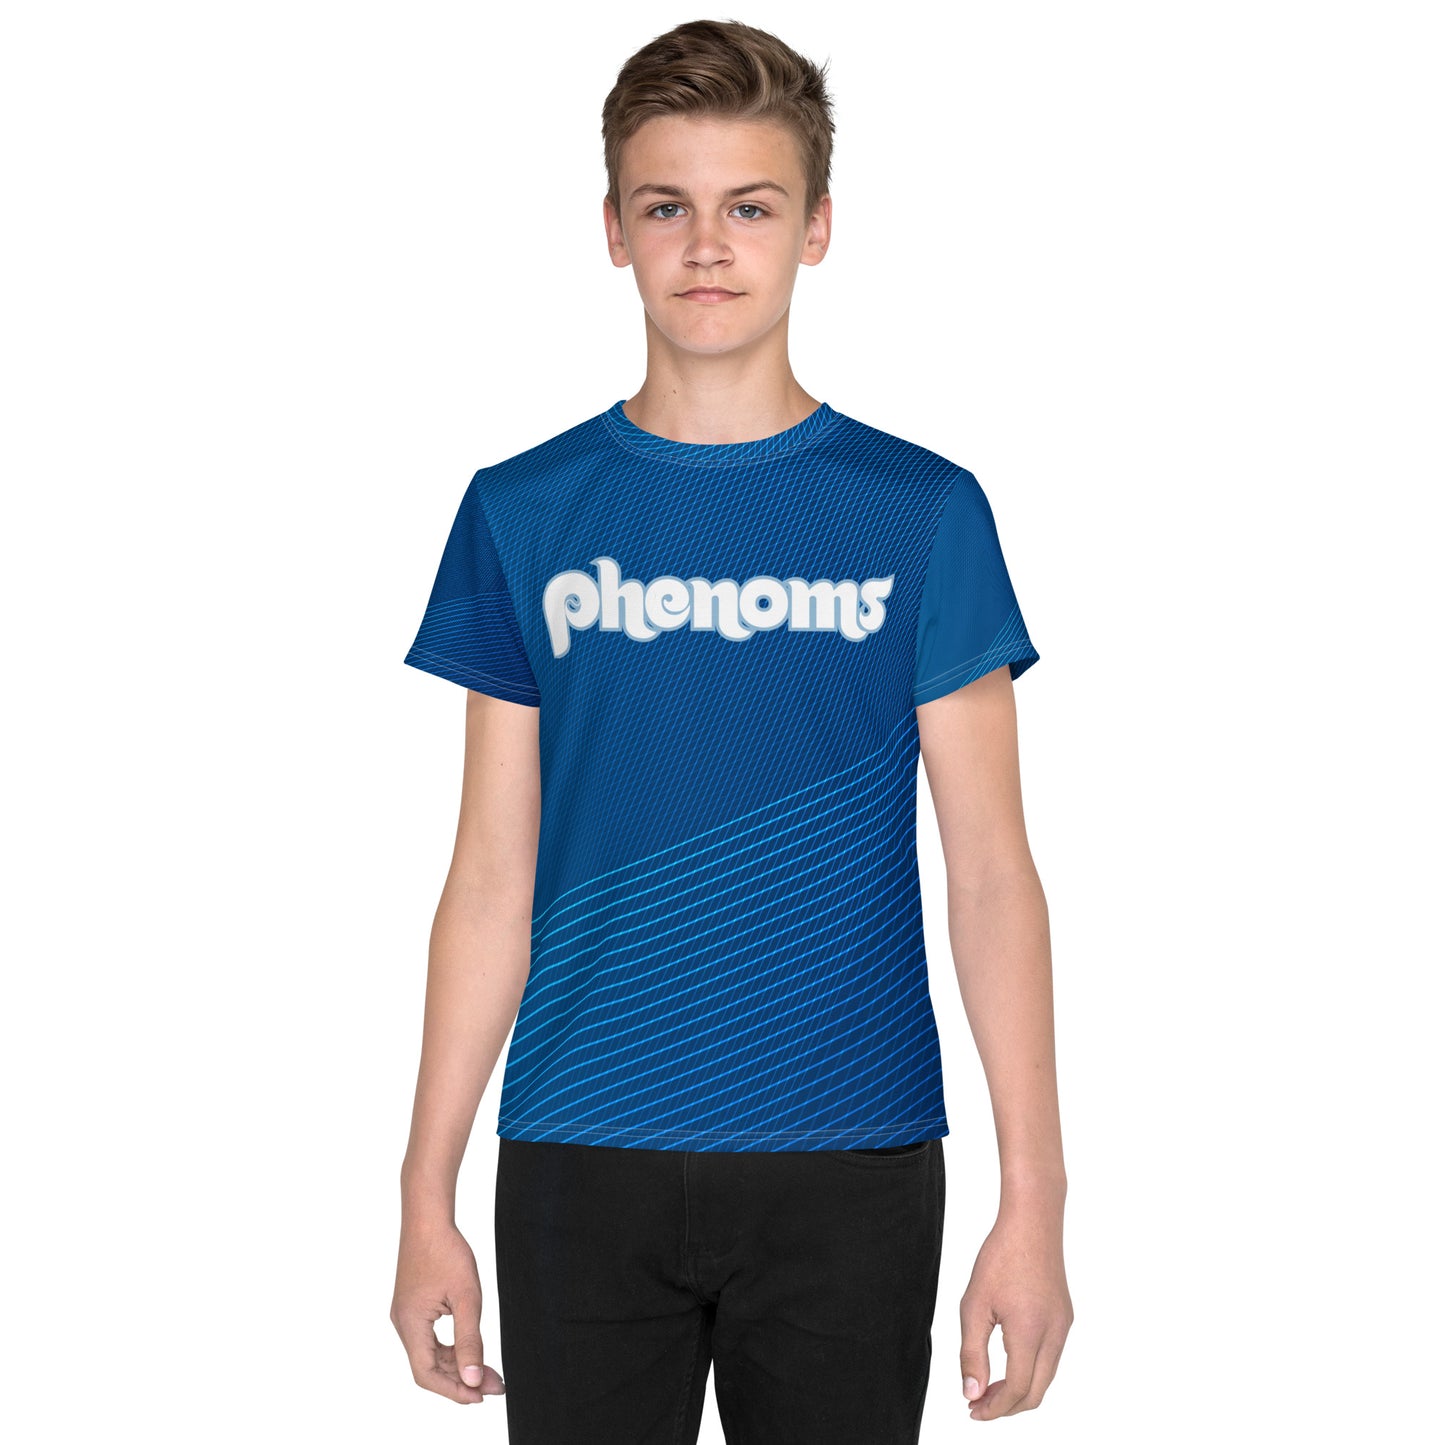 Tampa Phenoms Performance Youth crew neck t-shirt